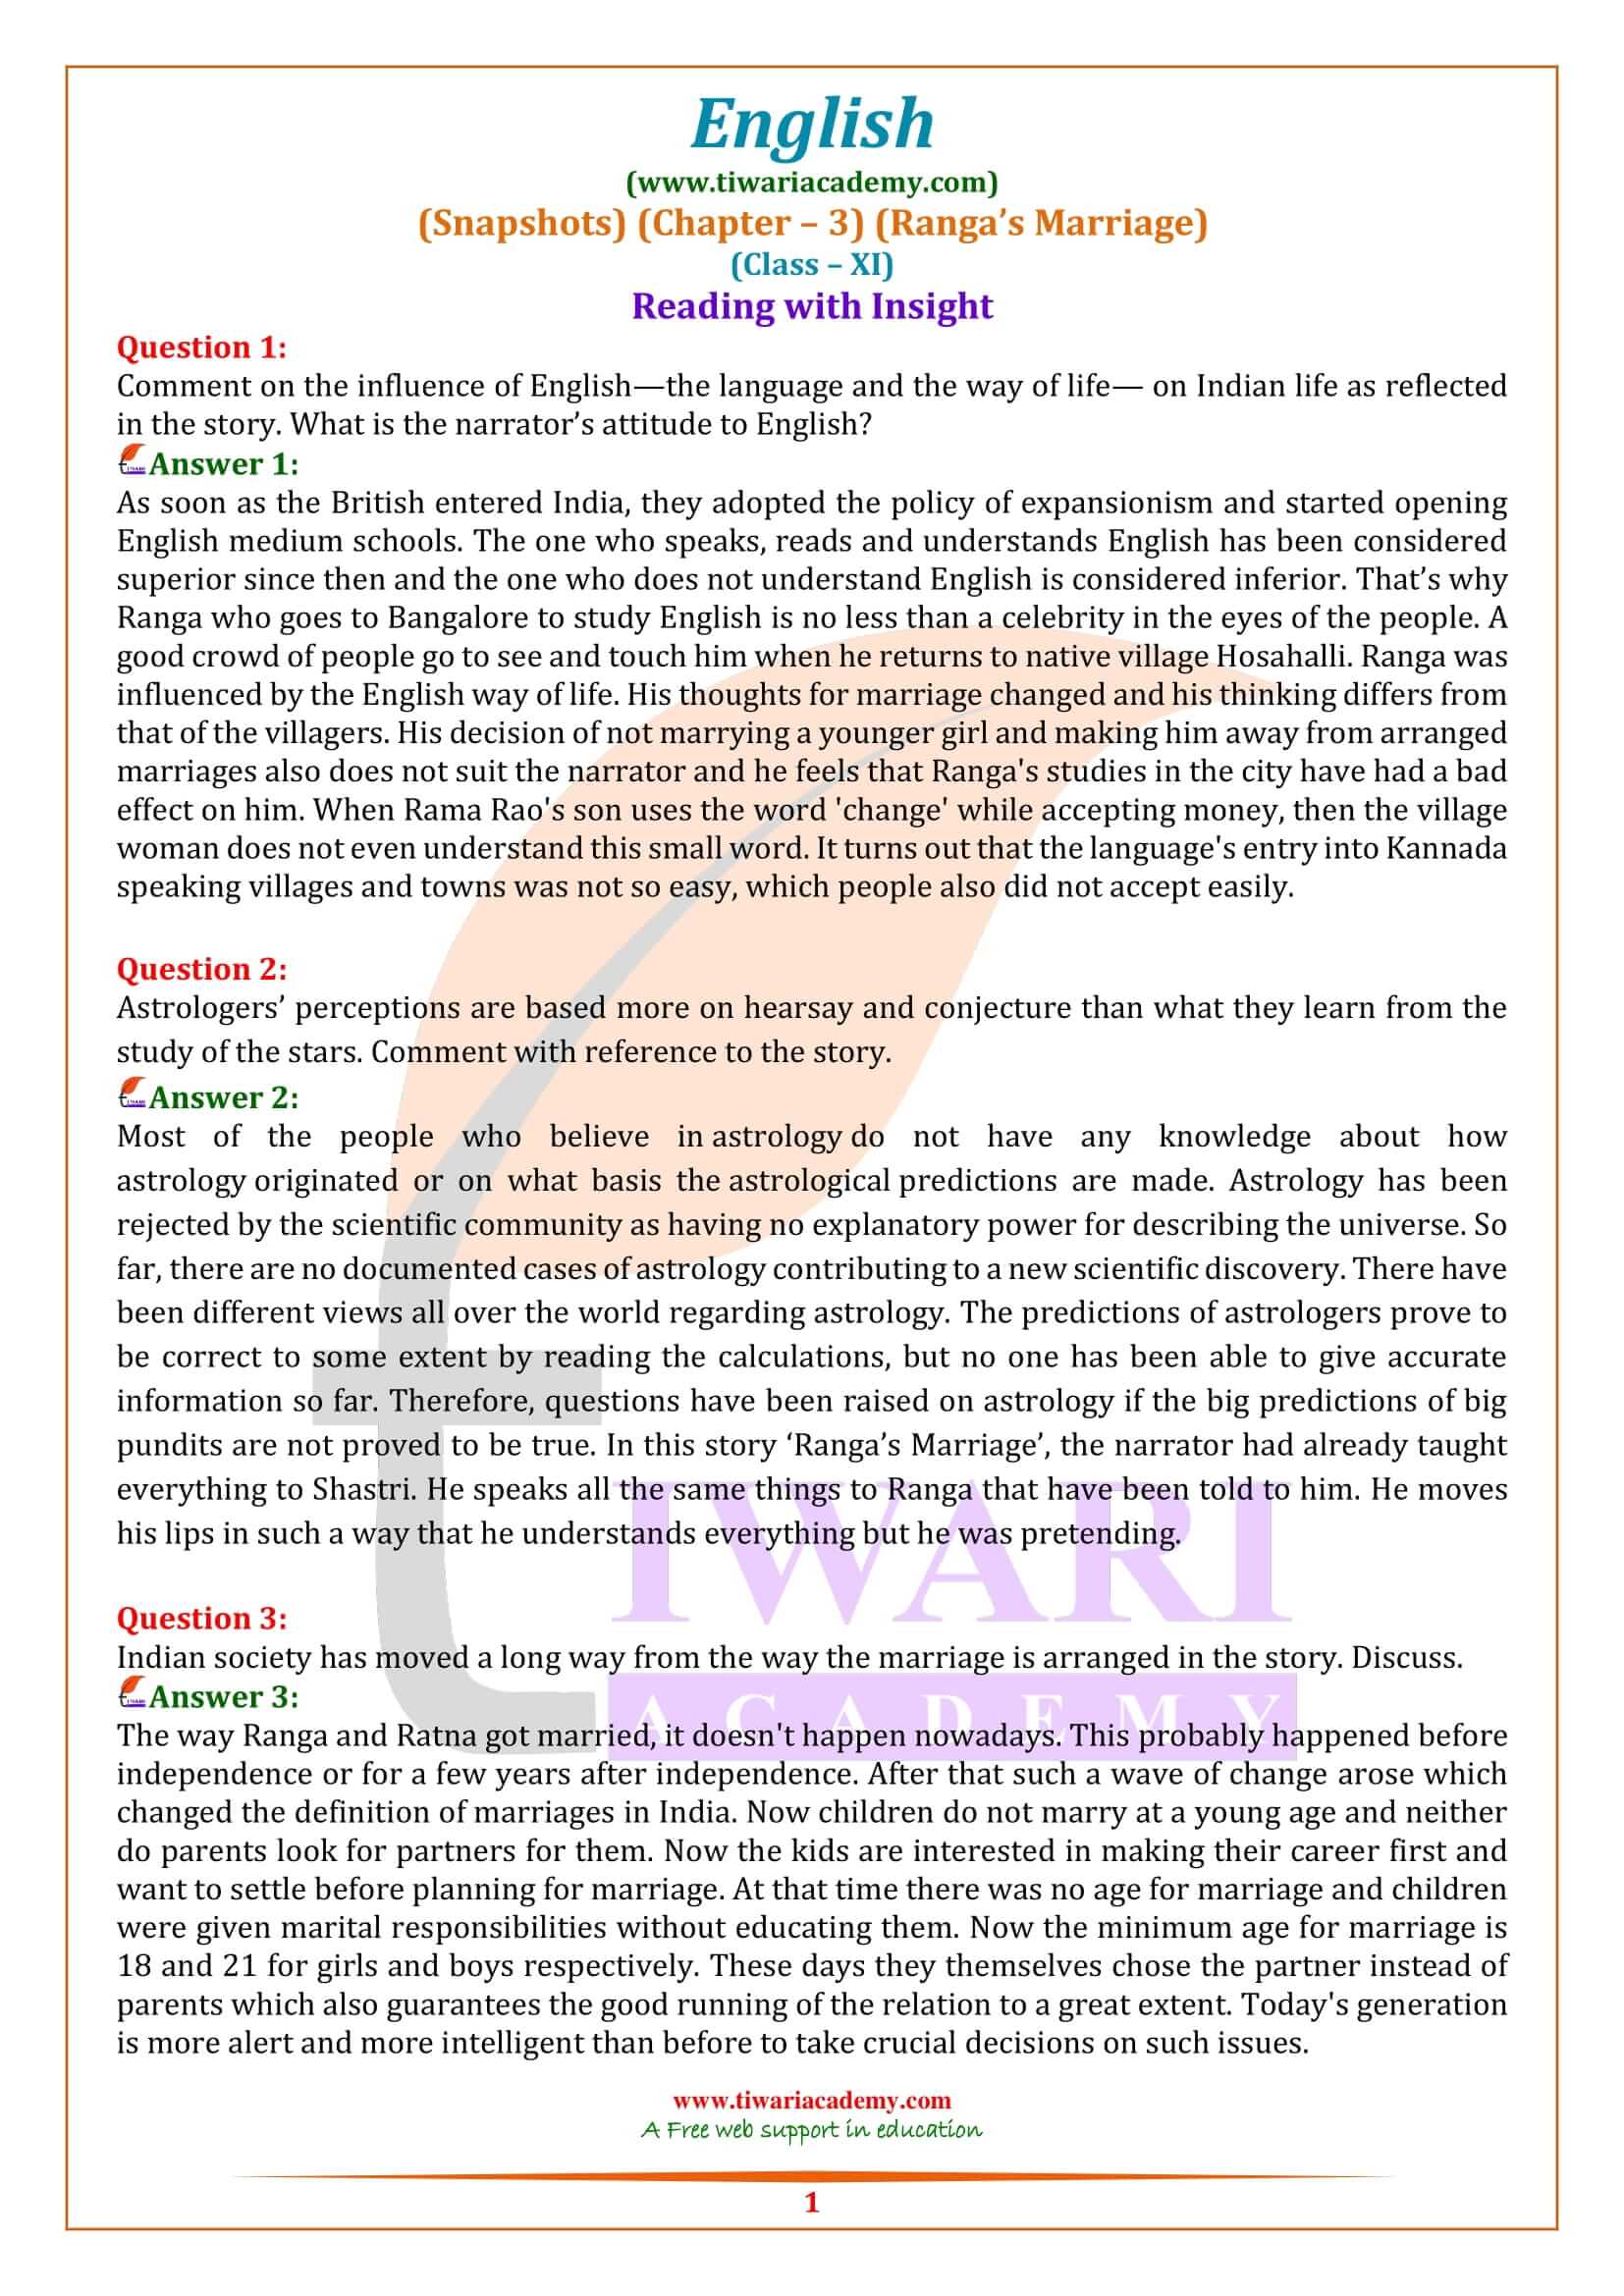 NCERT Solutions for Class 11 English Snapshots Chapter 3 Question Answers